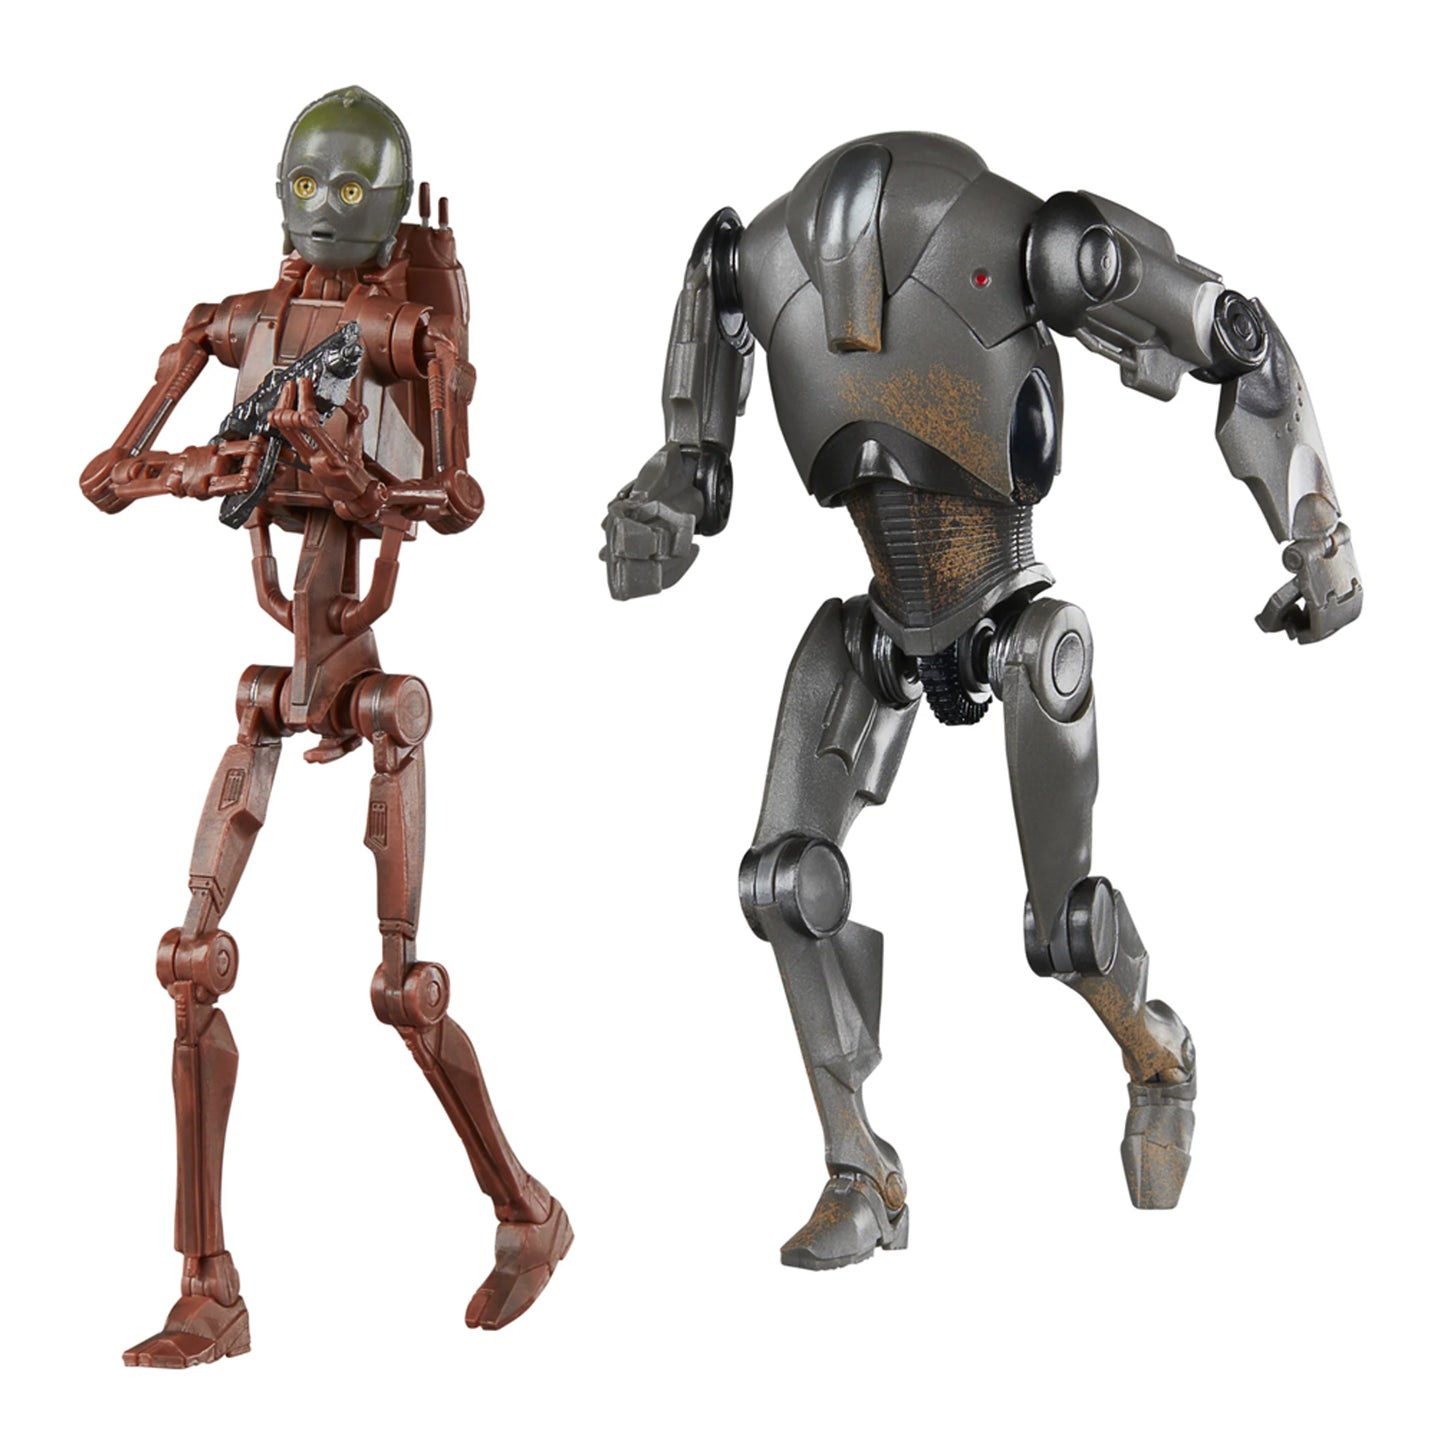 Star Wars The Black Series Star Wars: Attack of the Clones 2-Pack EXCLUSIVA